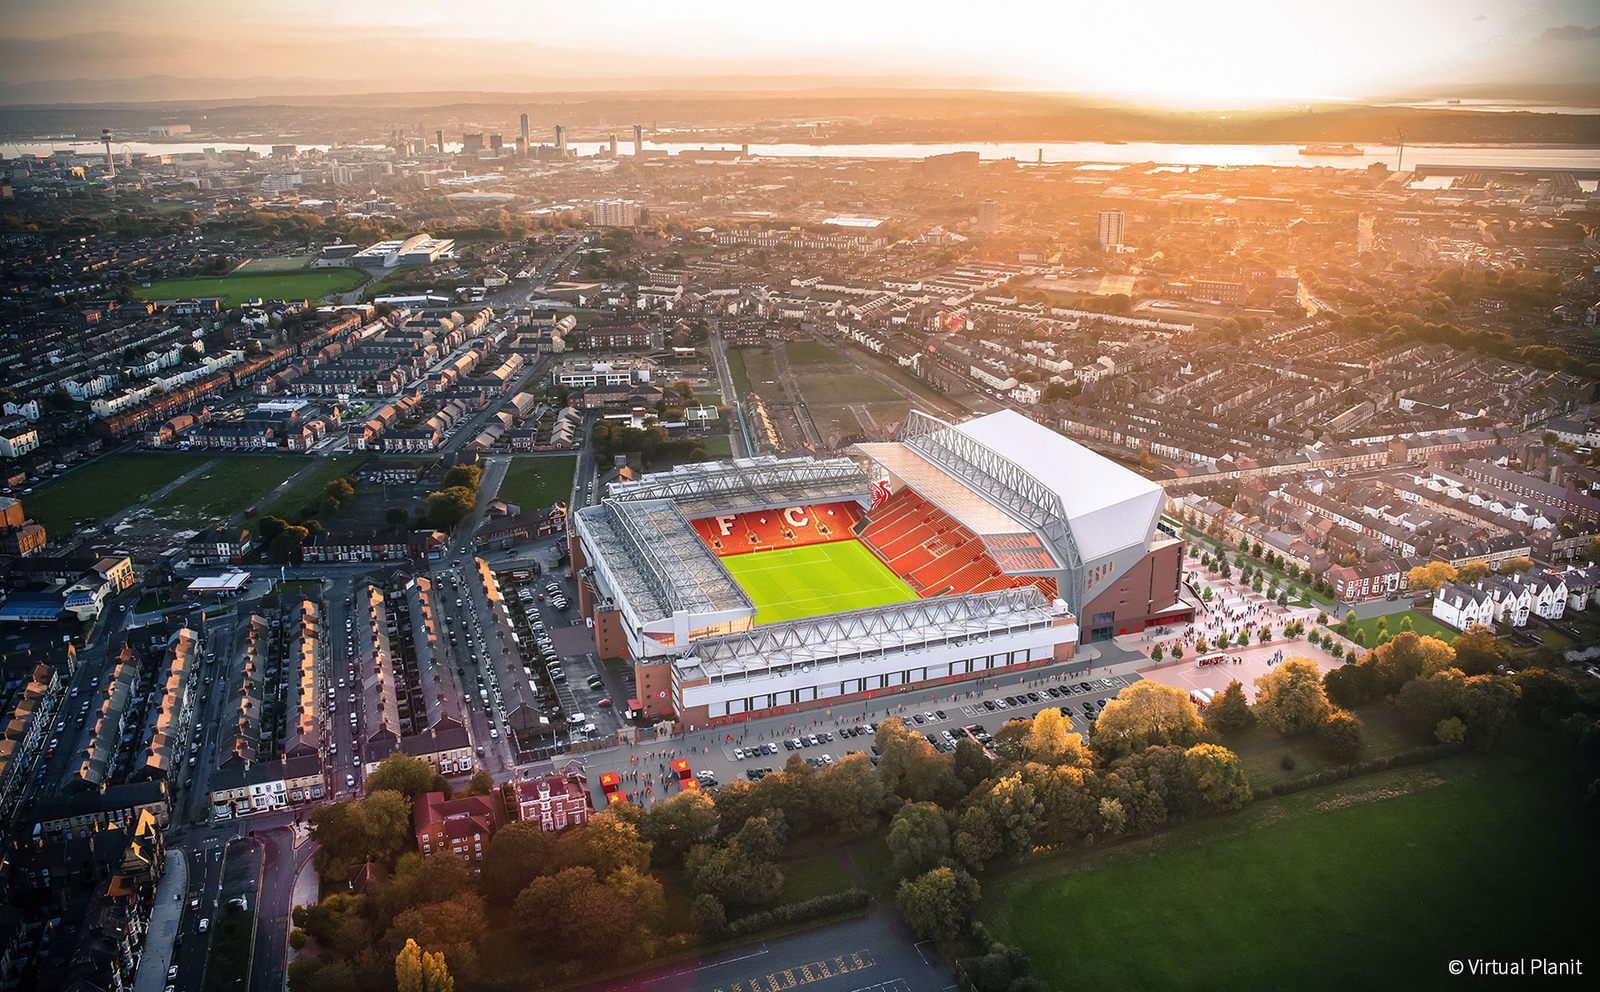 Anfield in Liverpool